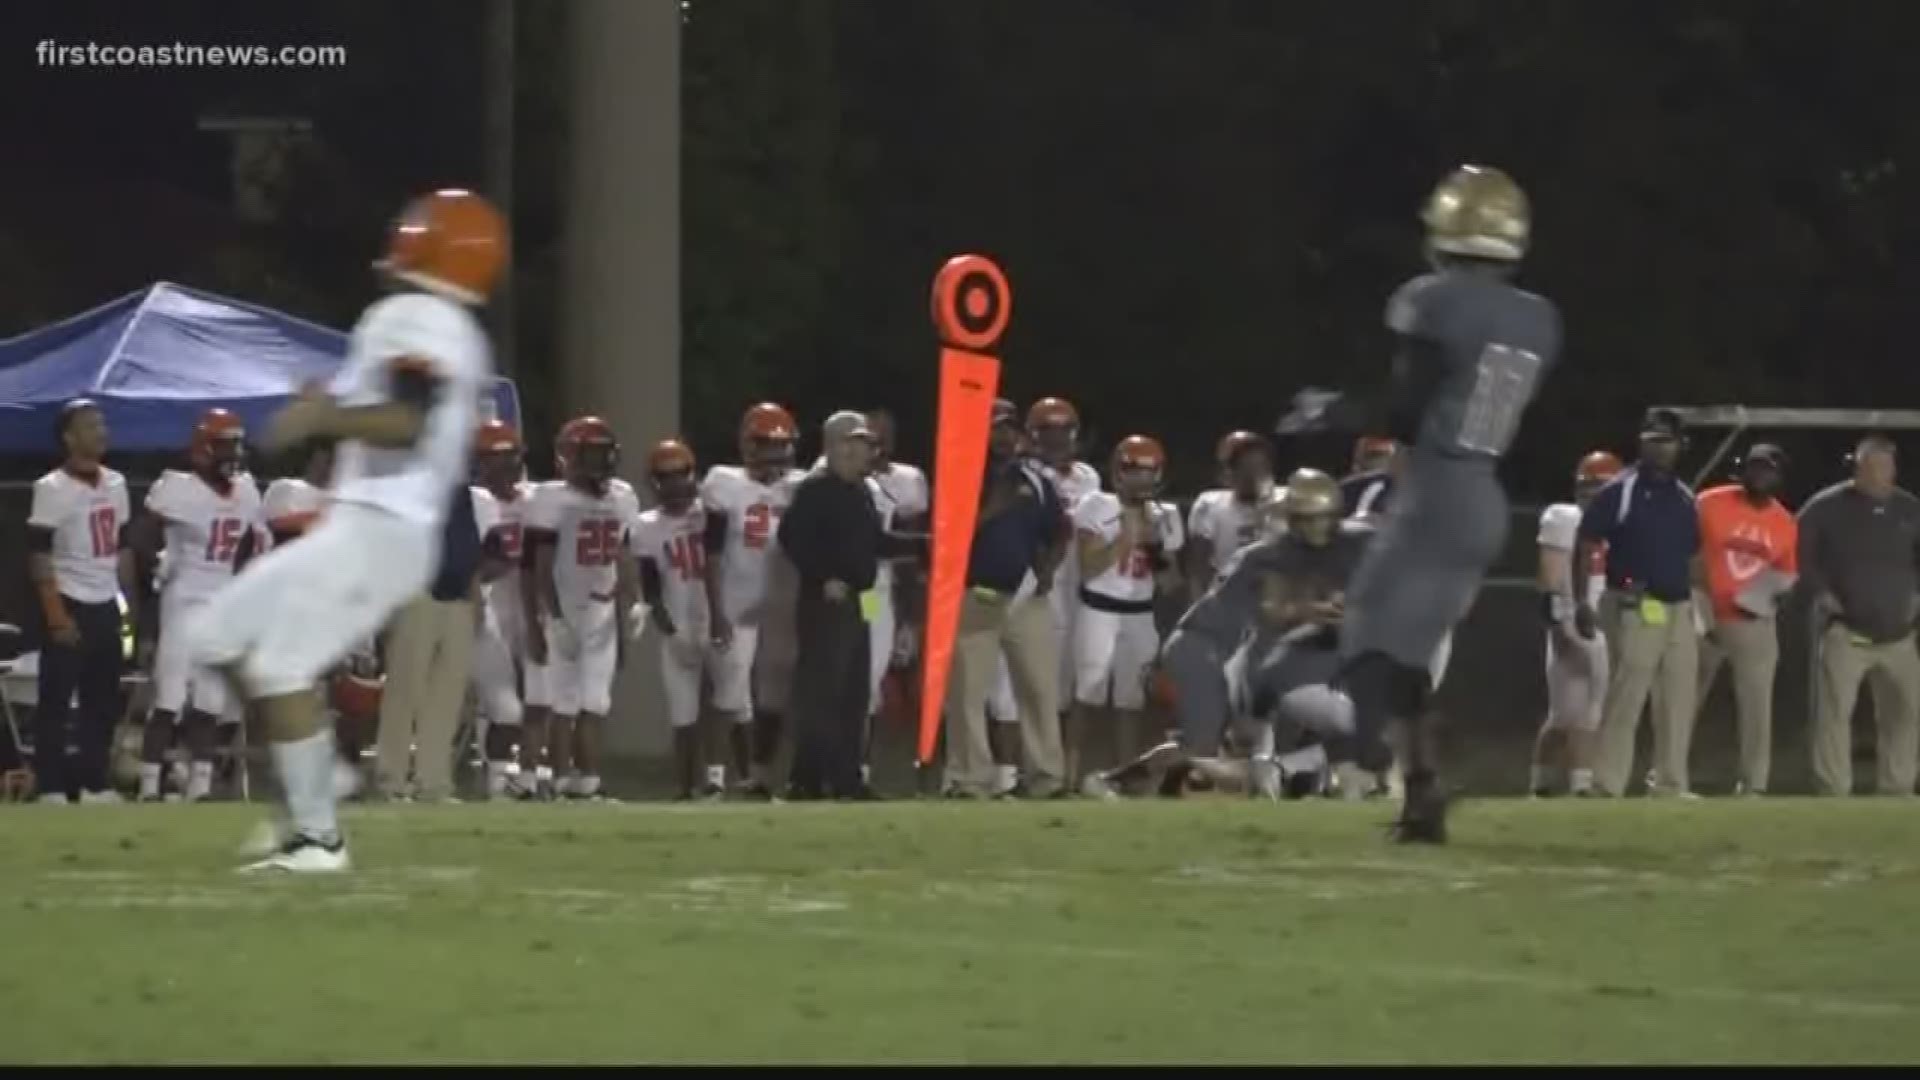 SIDELINE 2018: High school football playoff highlights featuring play and hit of the week.